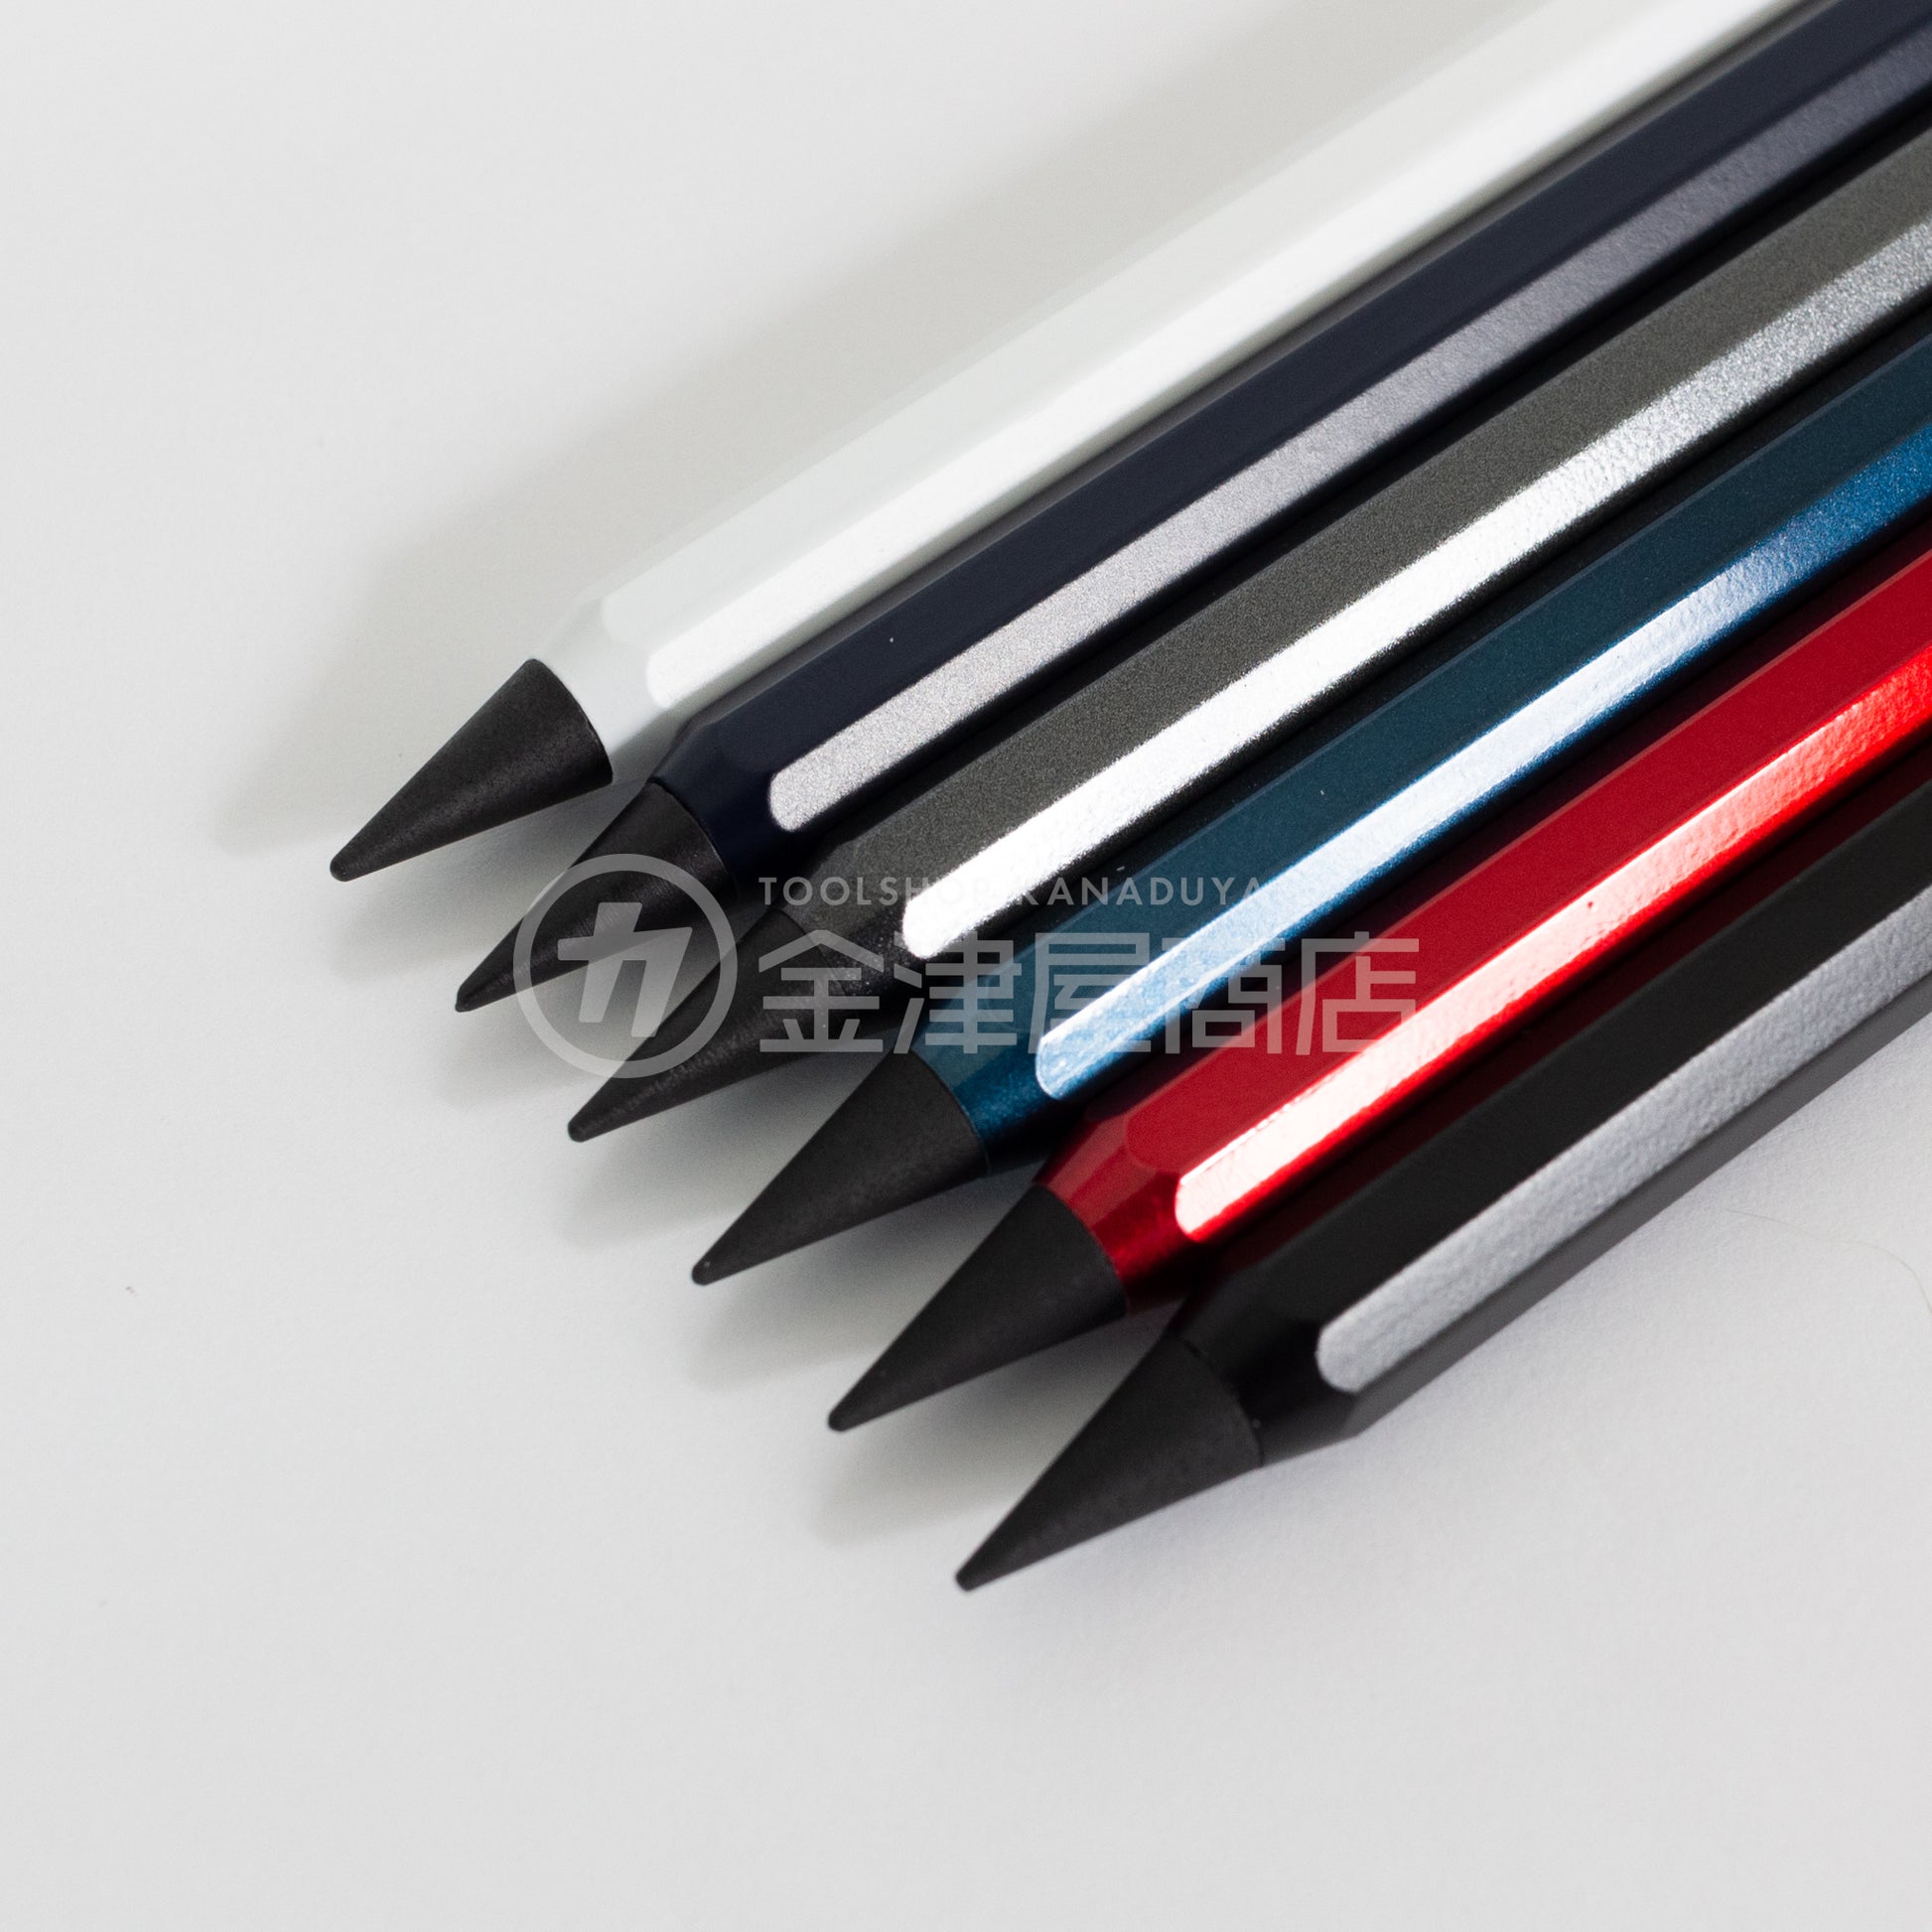 Sun-Star Metal pencil White even the lead is metal but it can write and  erase JP